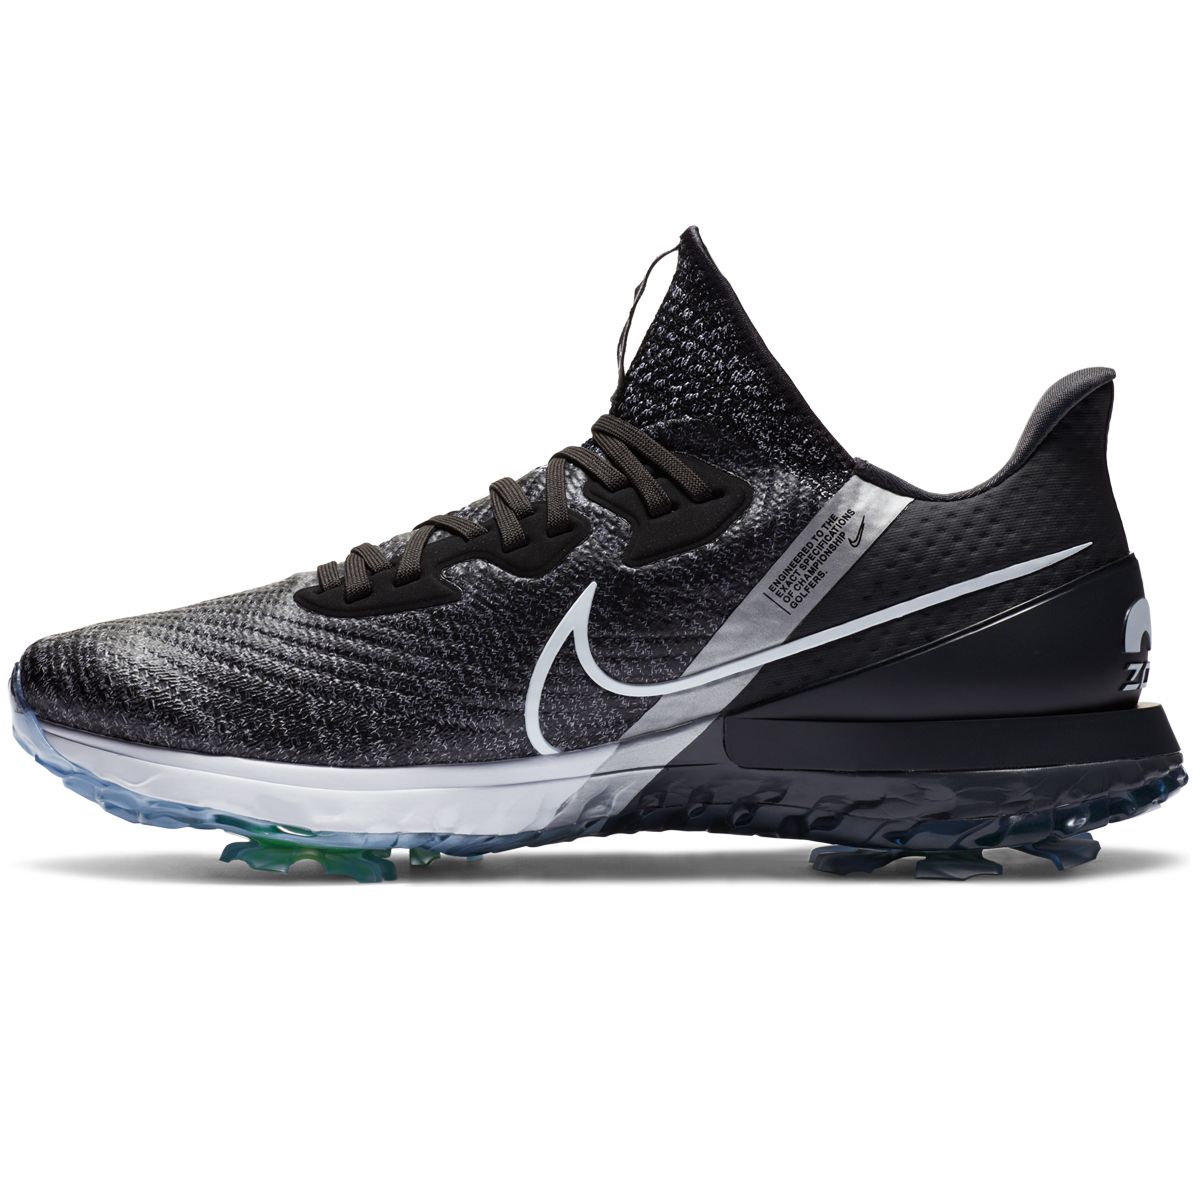 nike infinity zoom tour golf shoes